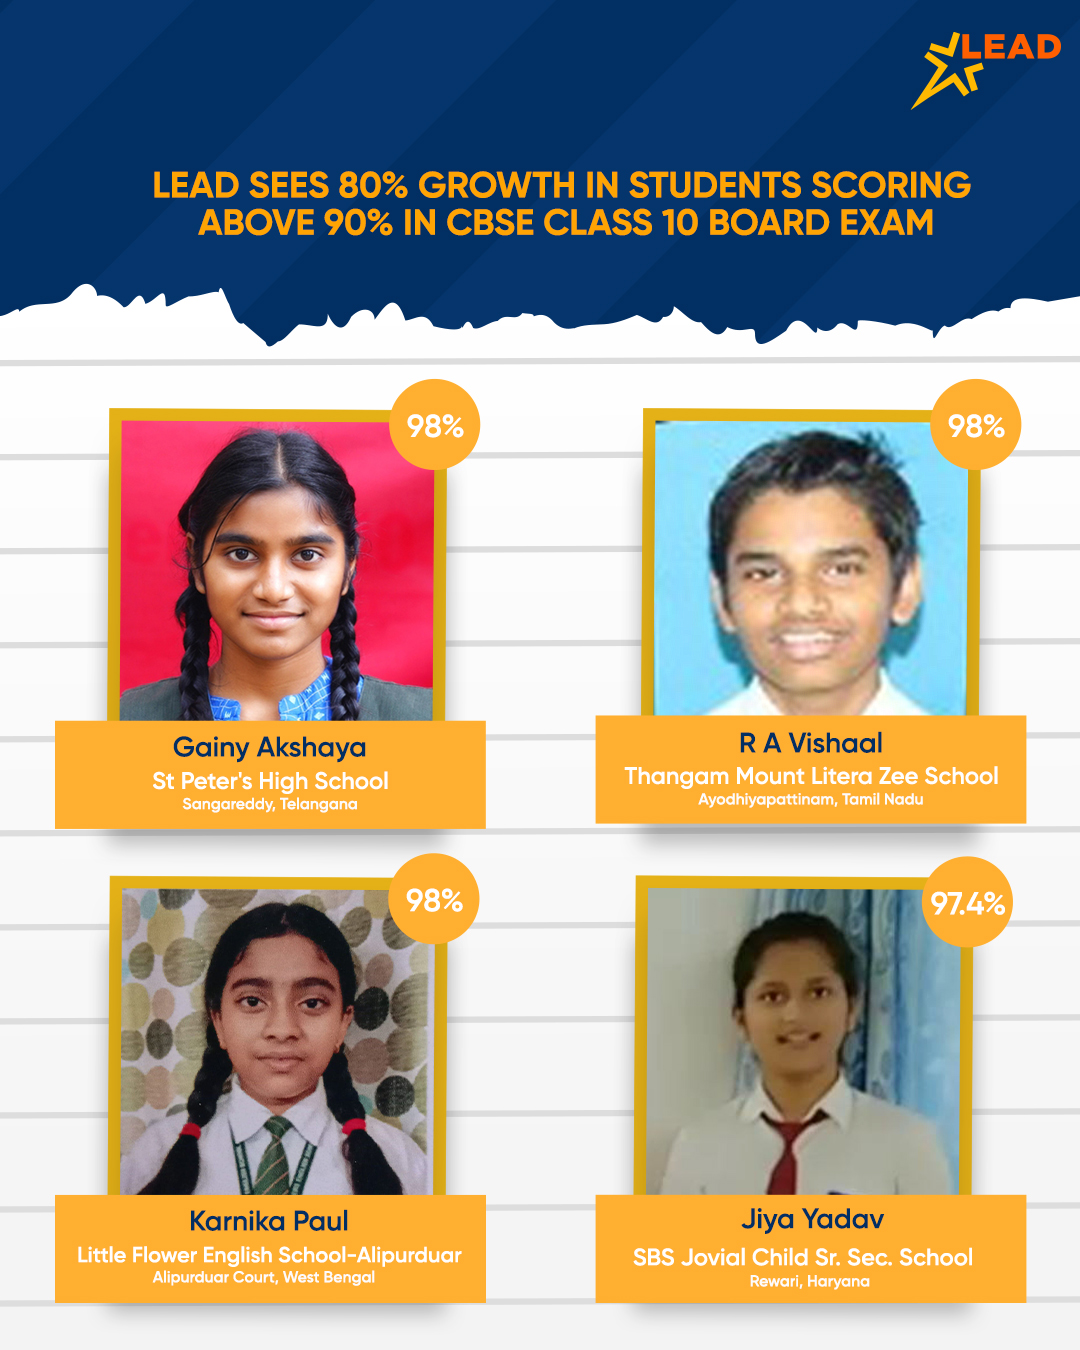 LEAD Sees 80% Growth in Students Scoring Above 90% in CBSE Class 10 Board Exam